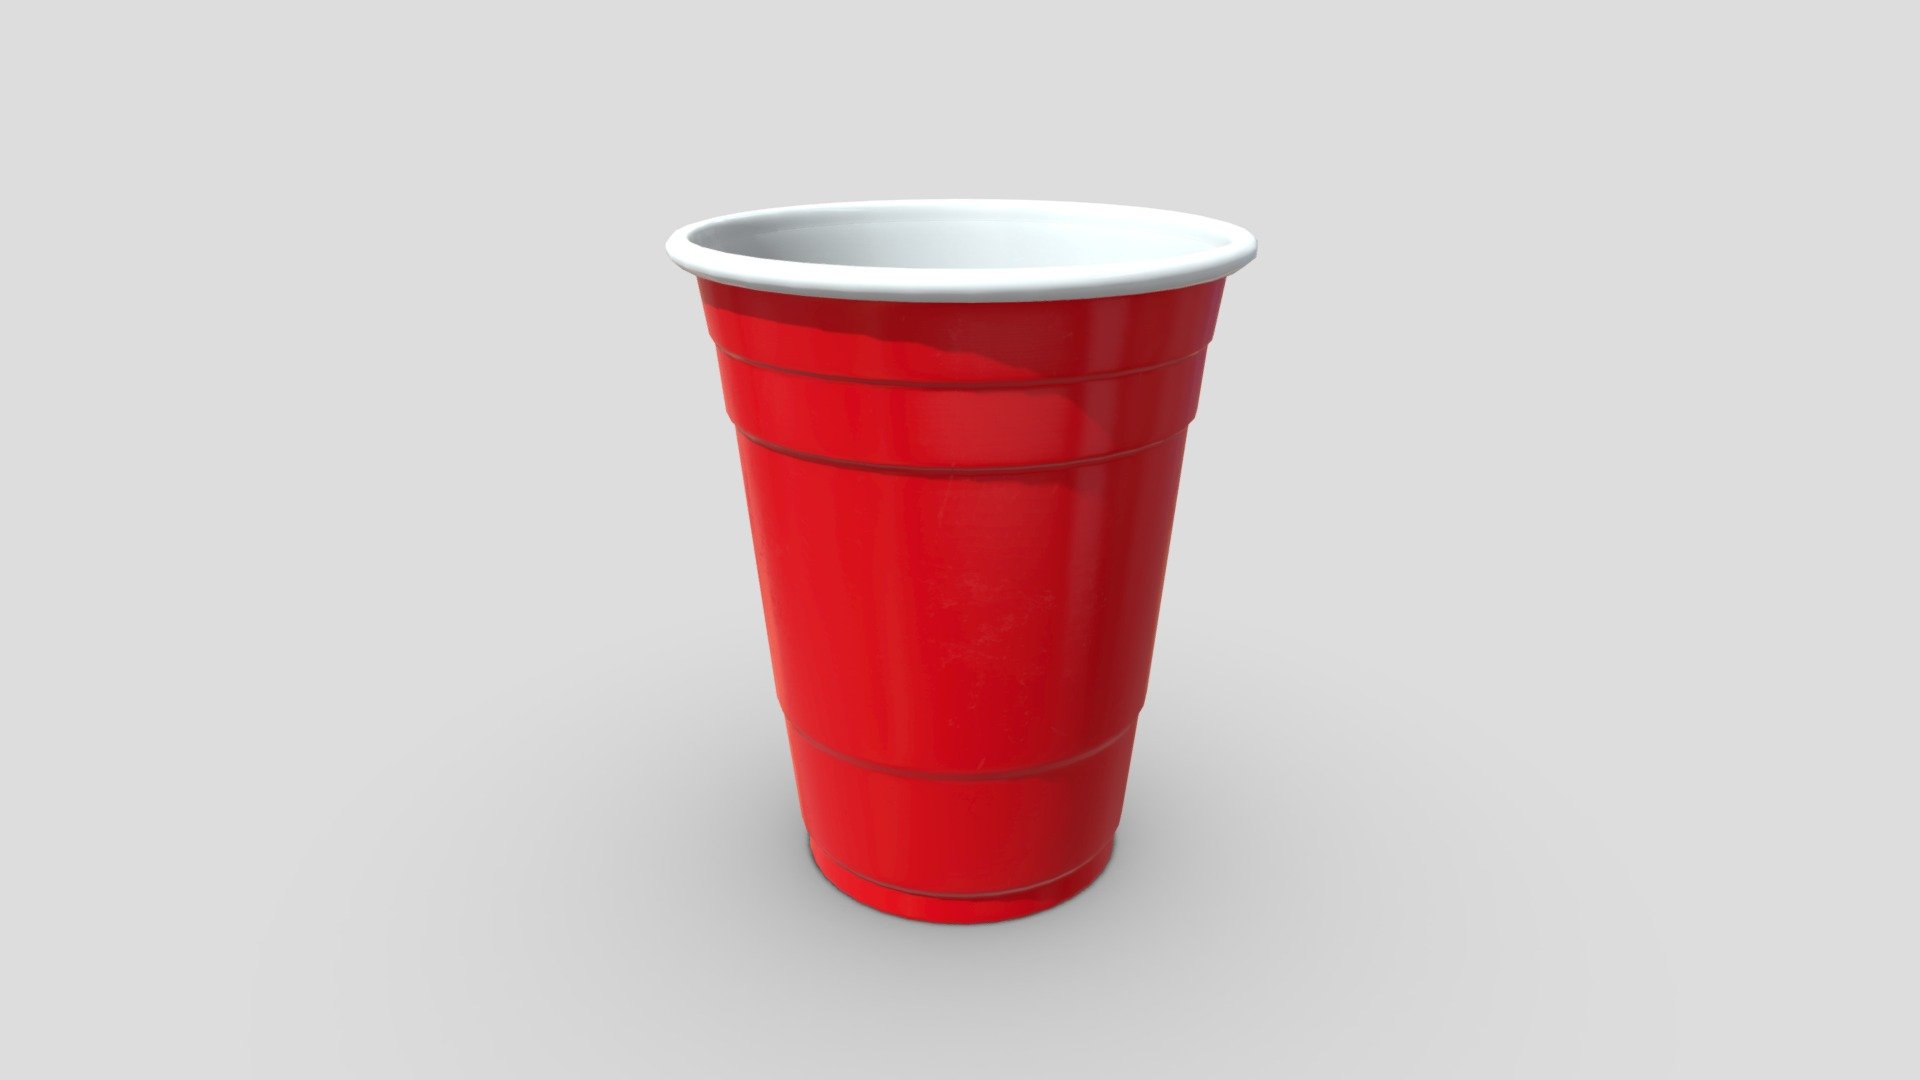 Rain 3d Red Plastic Cups Falling Stock Footage Video (100% Royalty-free)  1042335580